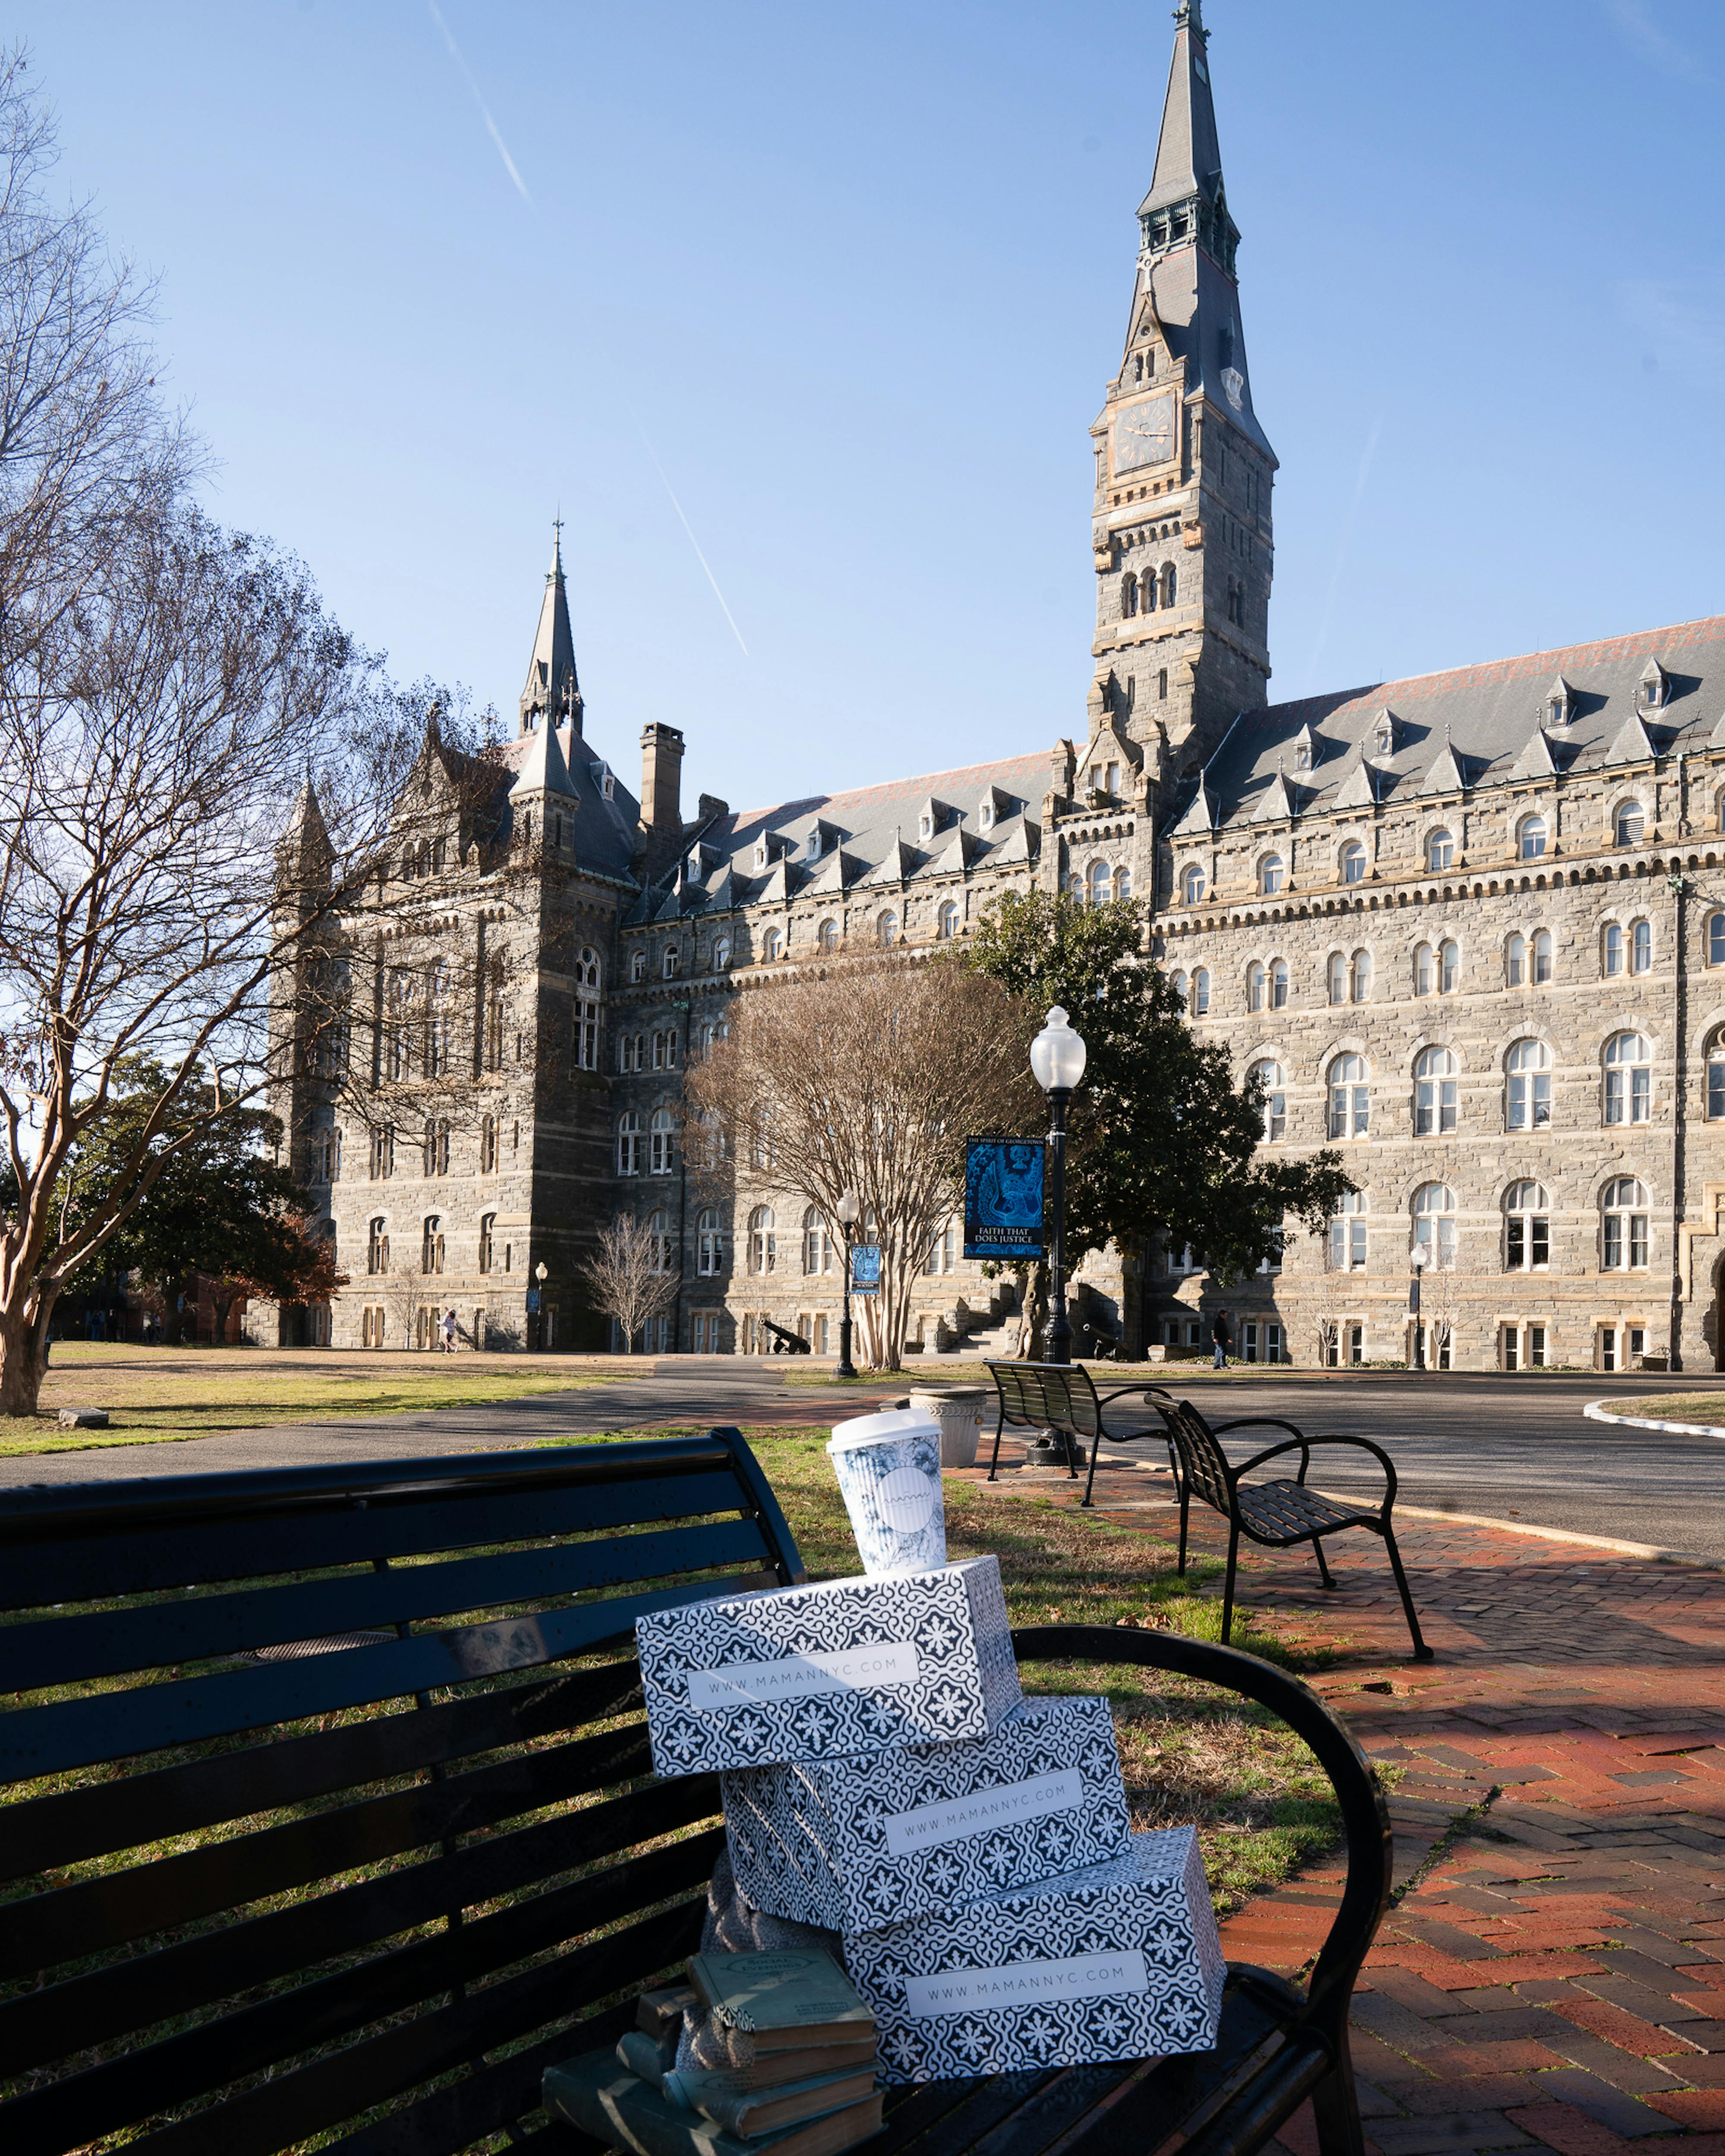 maman cup and boxes on bench outside of georgetown university building